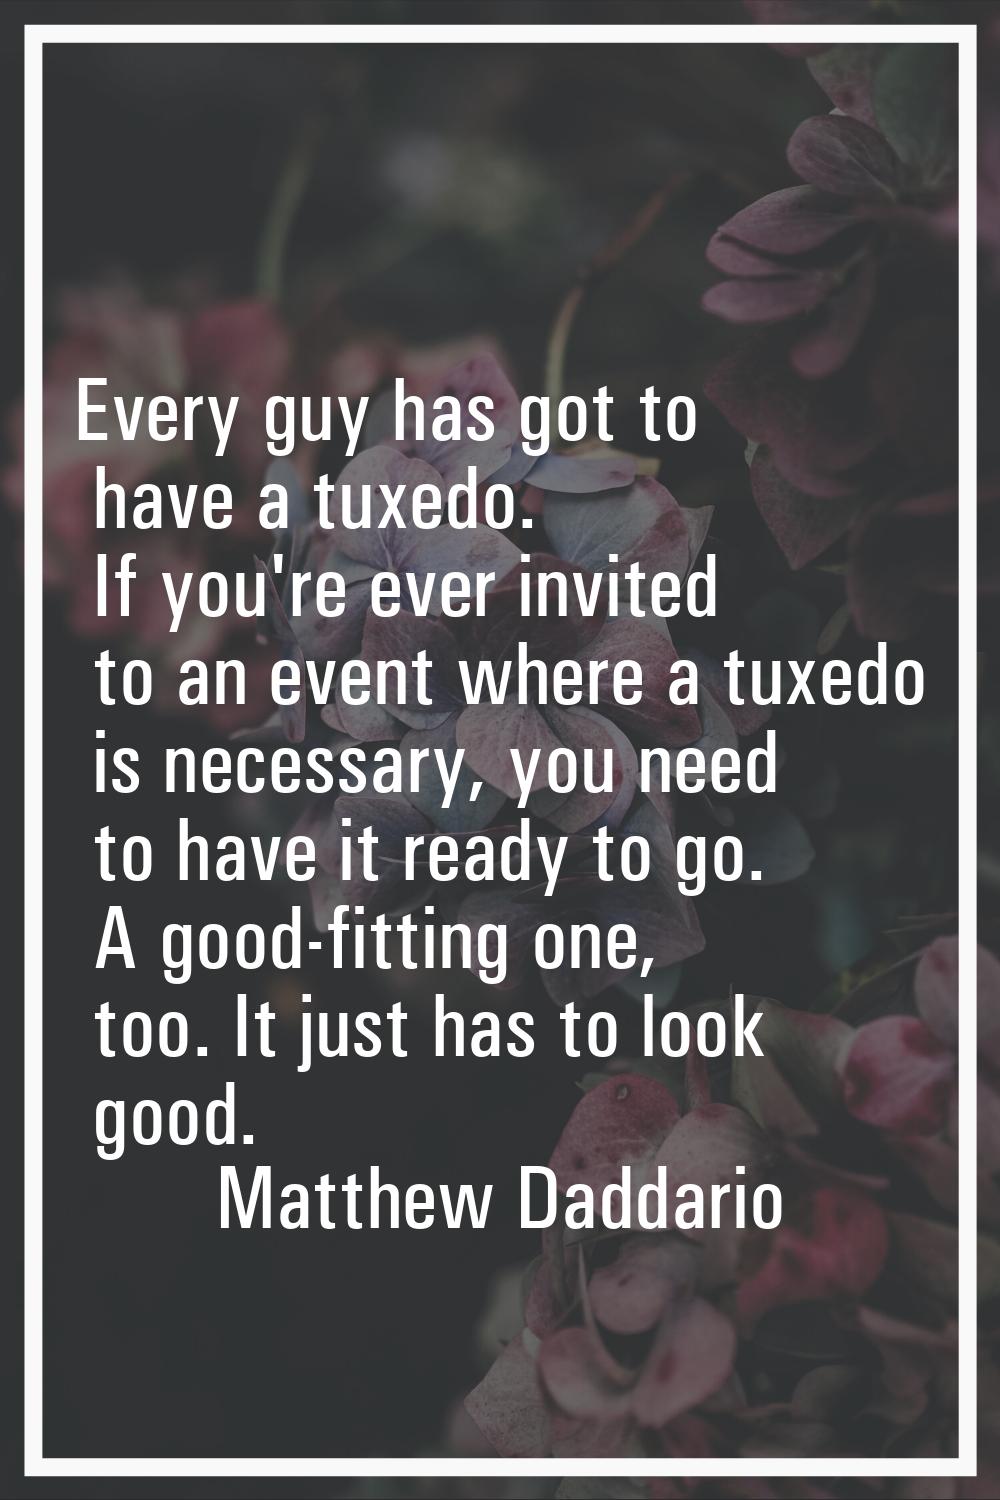 Every guy has got to have a tuxedo. If you're ever invited to an event where a tuxedo is necessary,